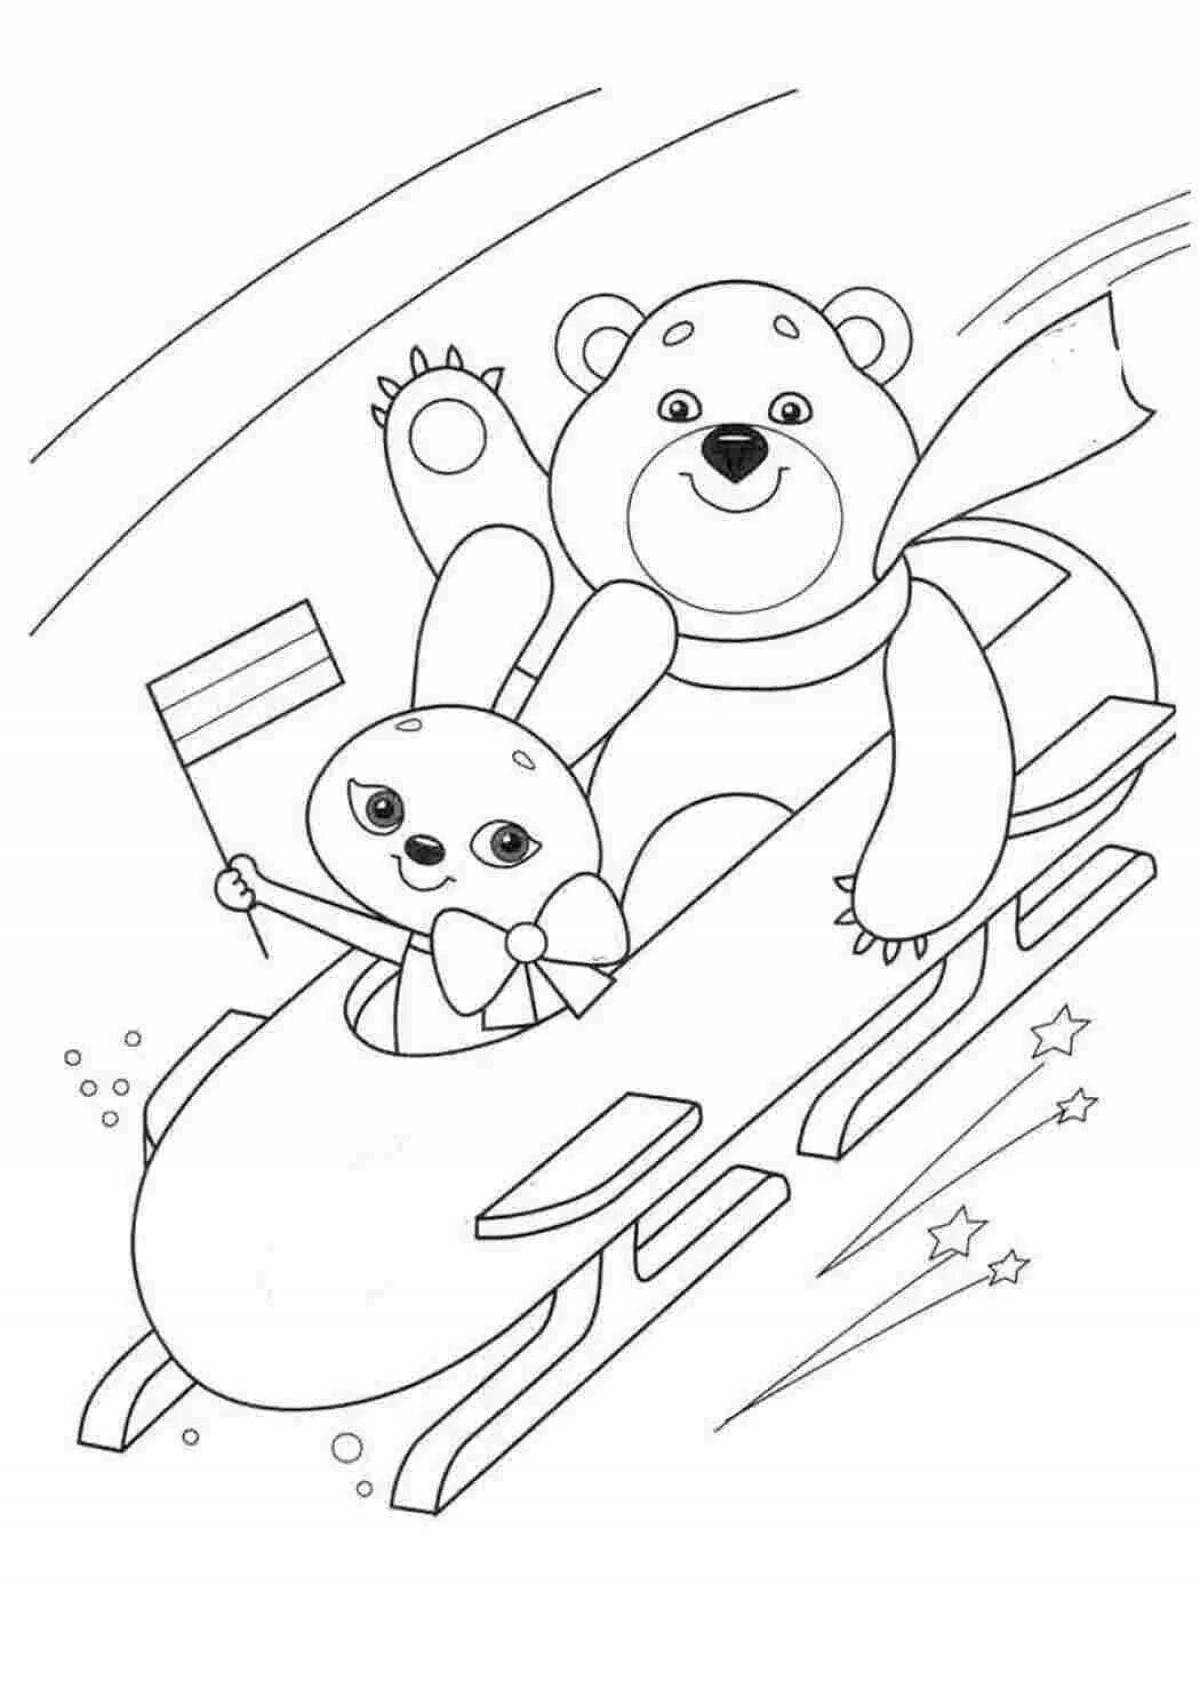 Dynamic winter olympiad coloring book